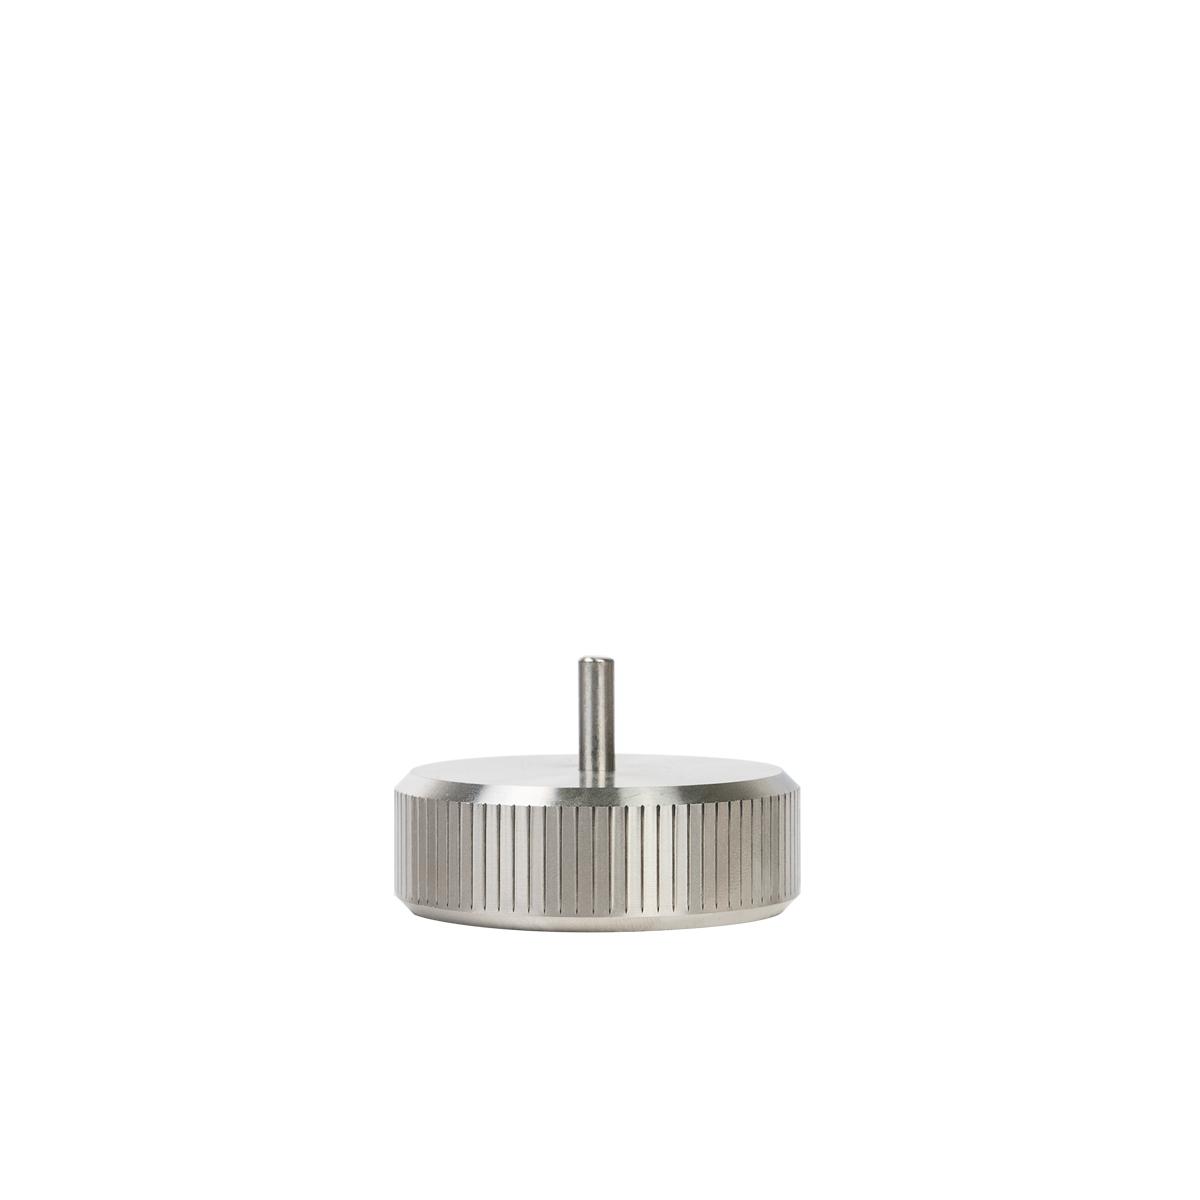 Primary image of Stainless Steel Razor Stand